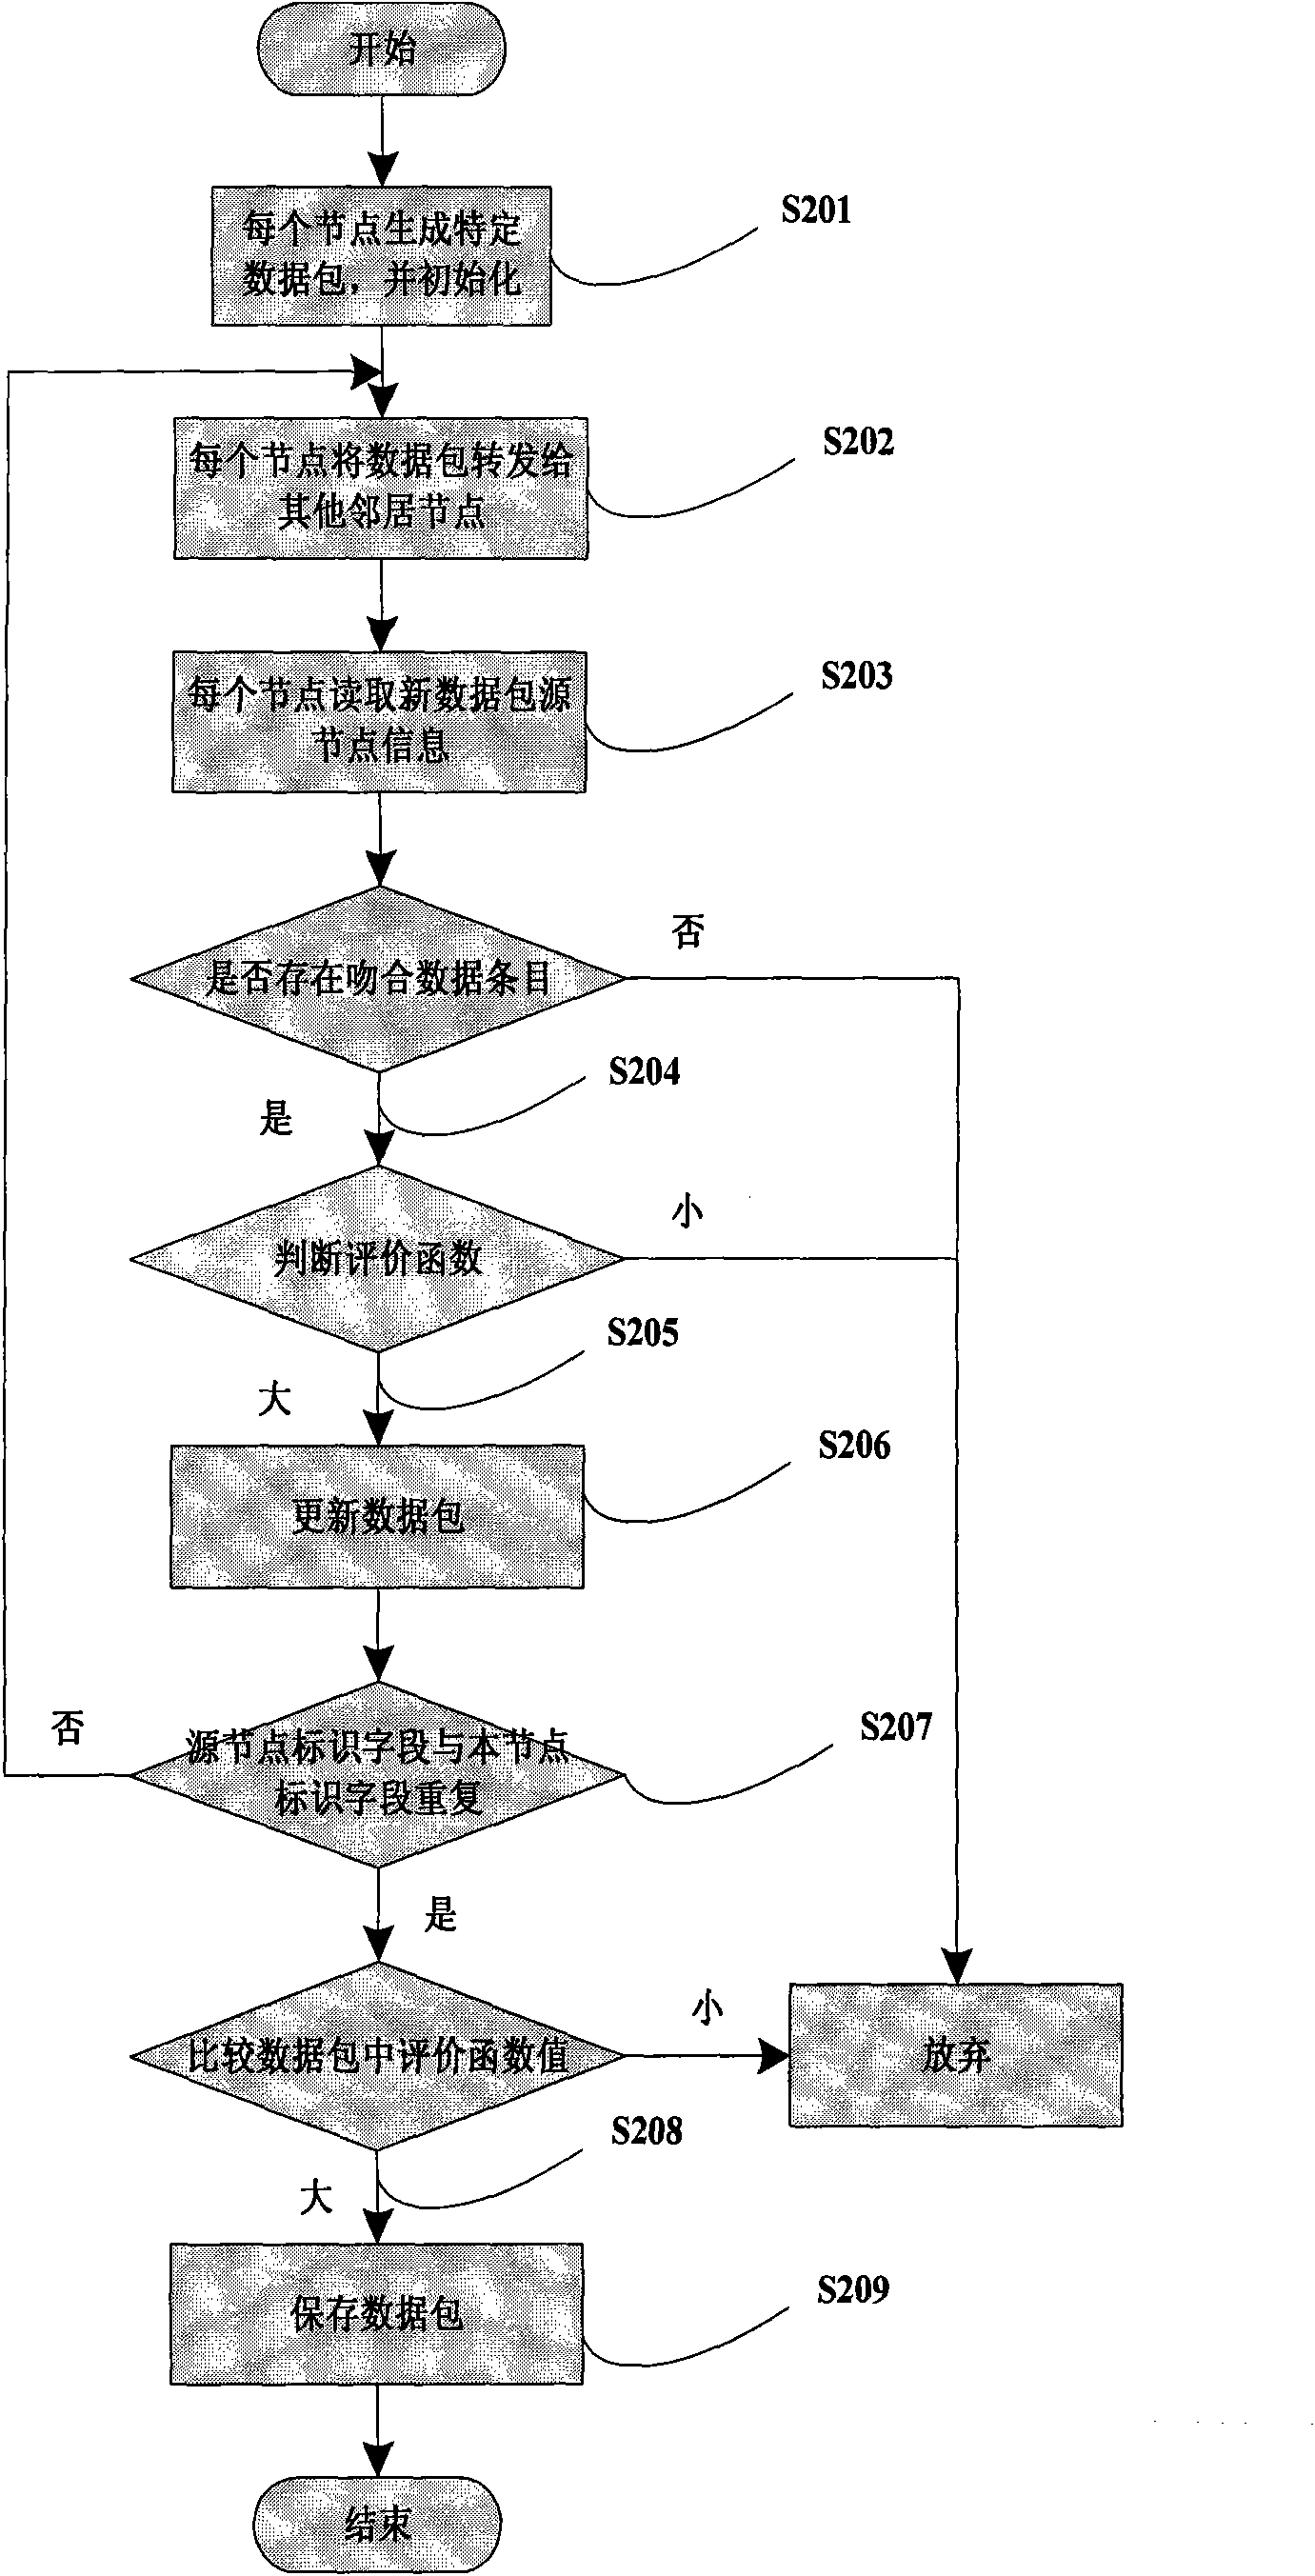 Method of distributed configuration of protection of automatically switching optical network